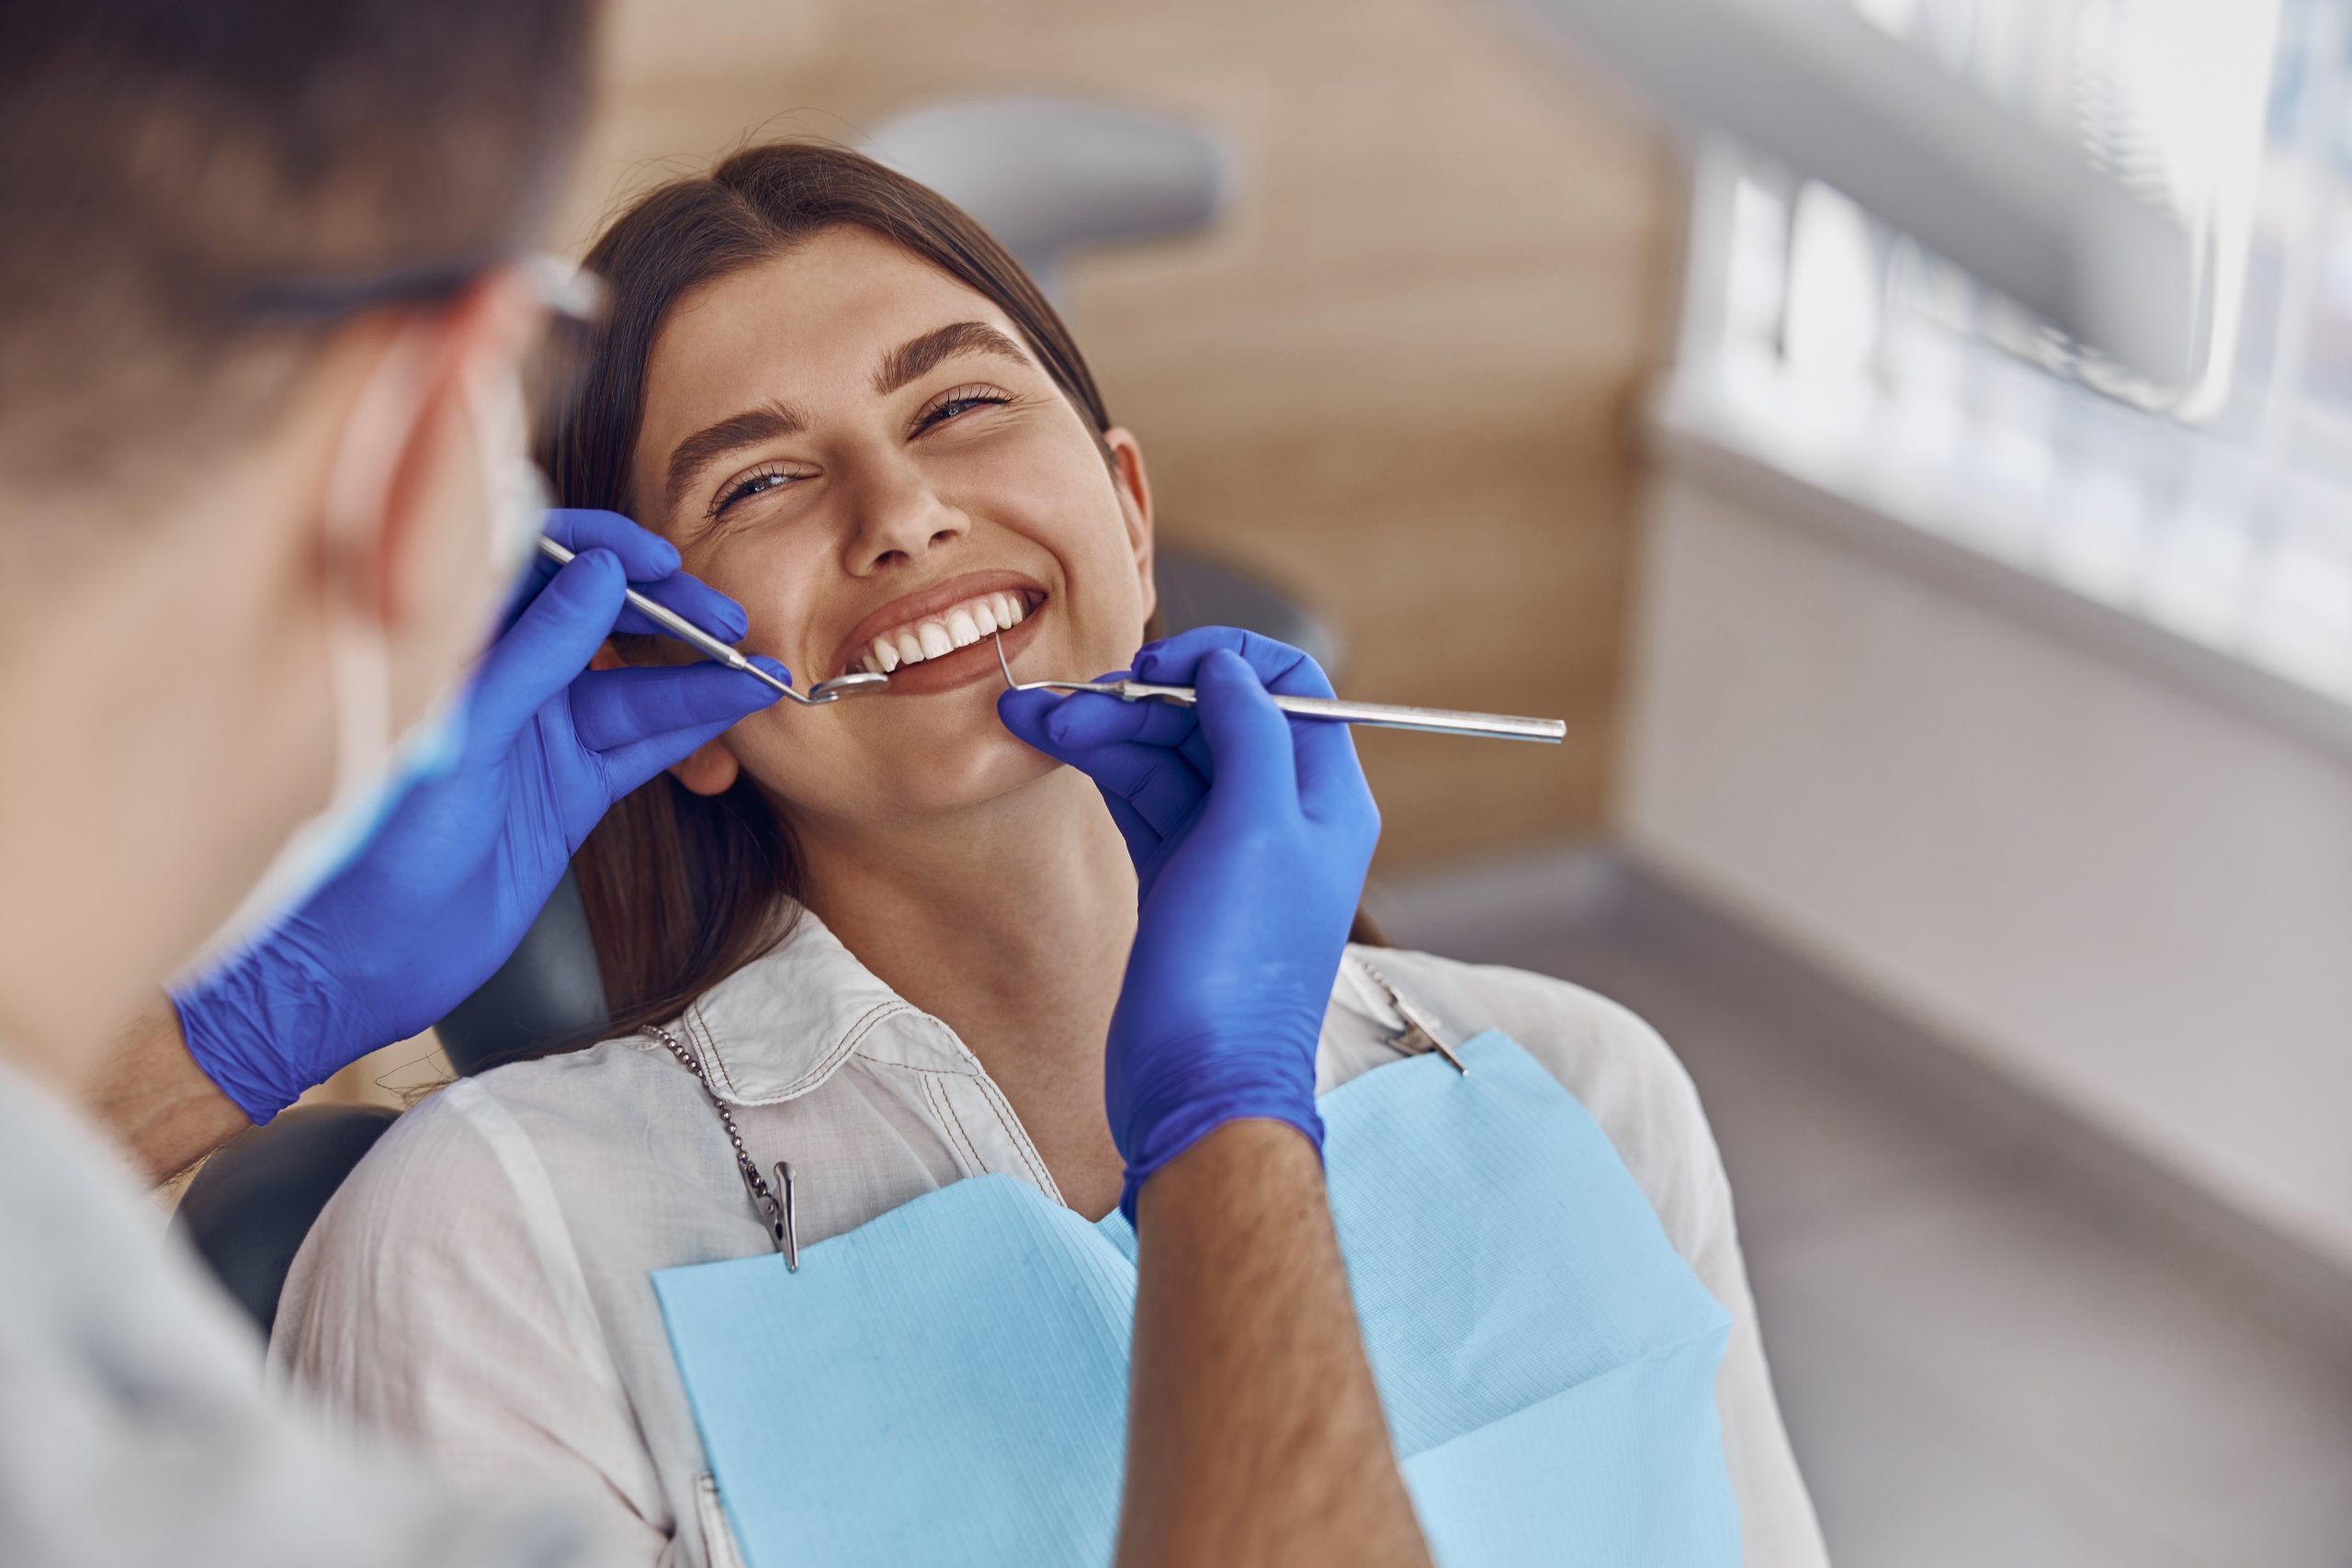 Smiling woman getting her teeth checked by dentist